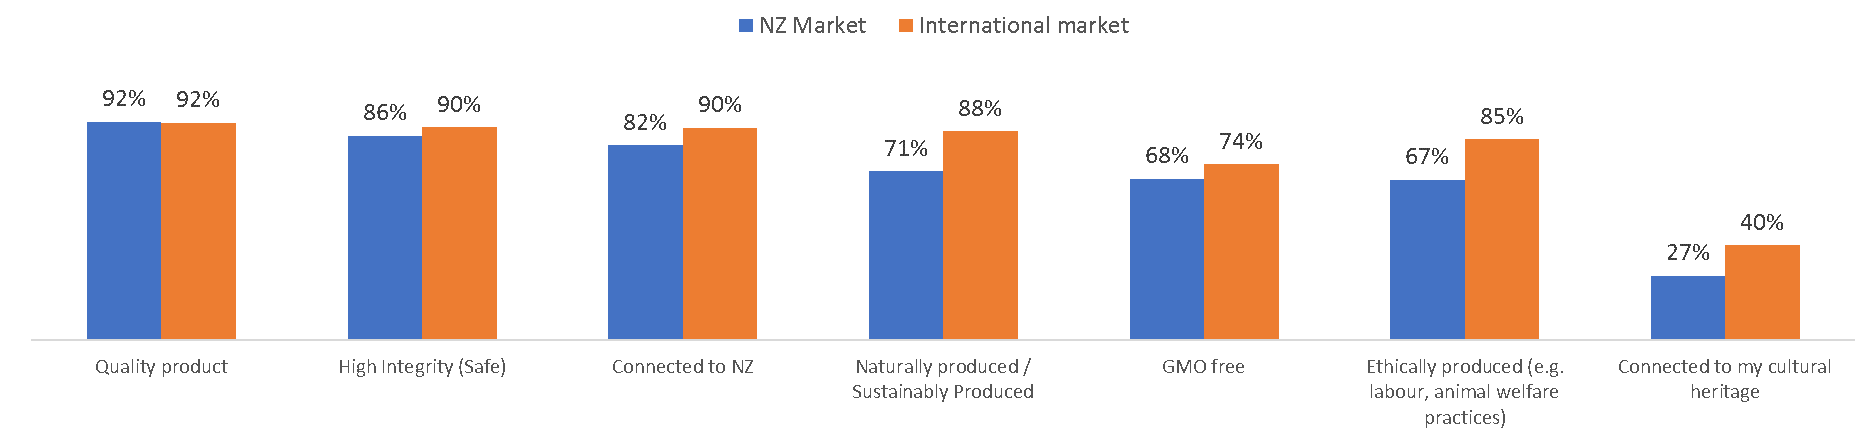 Perceived view of consumers in New Zealand and internationally on different matters